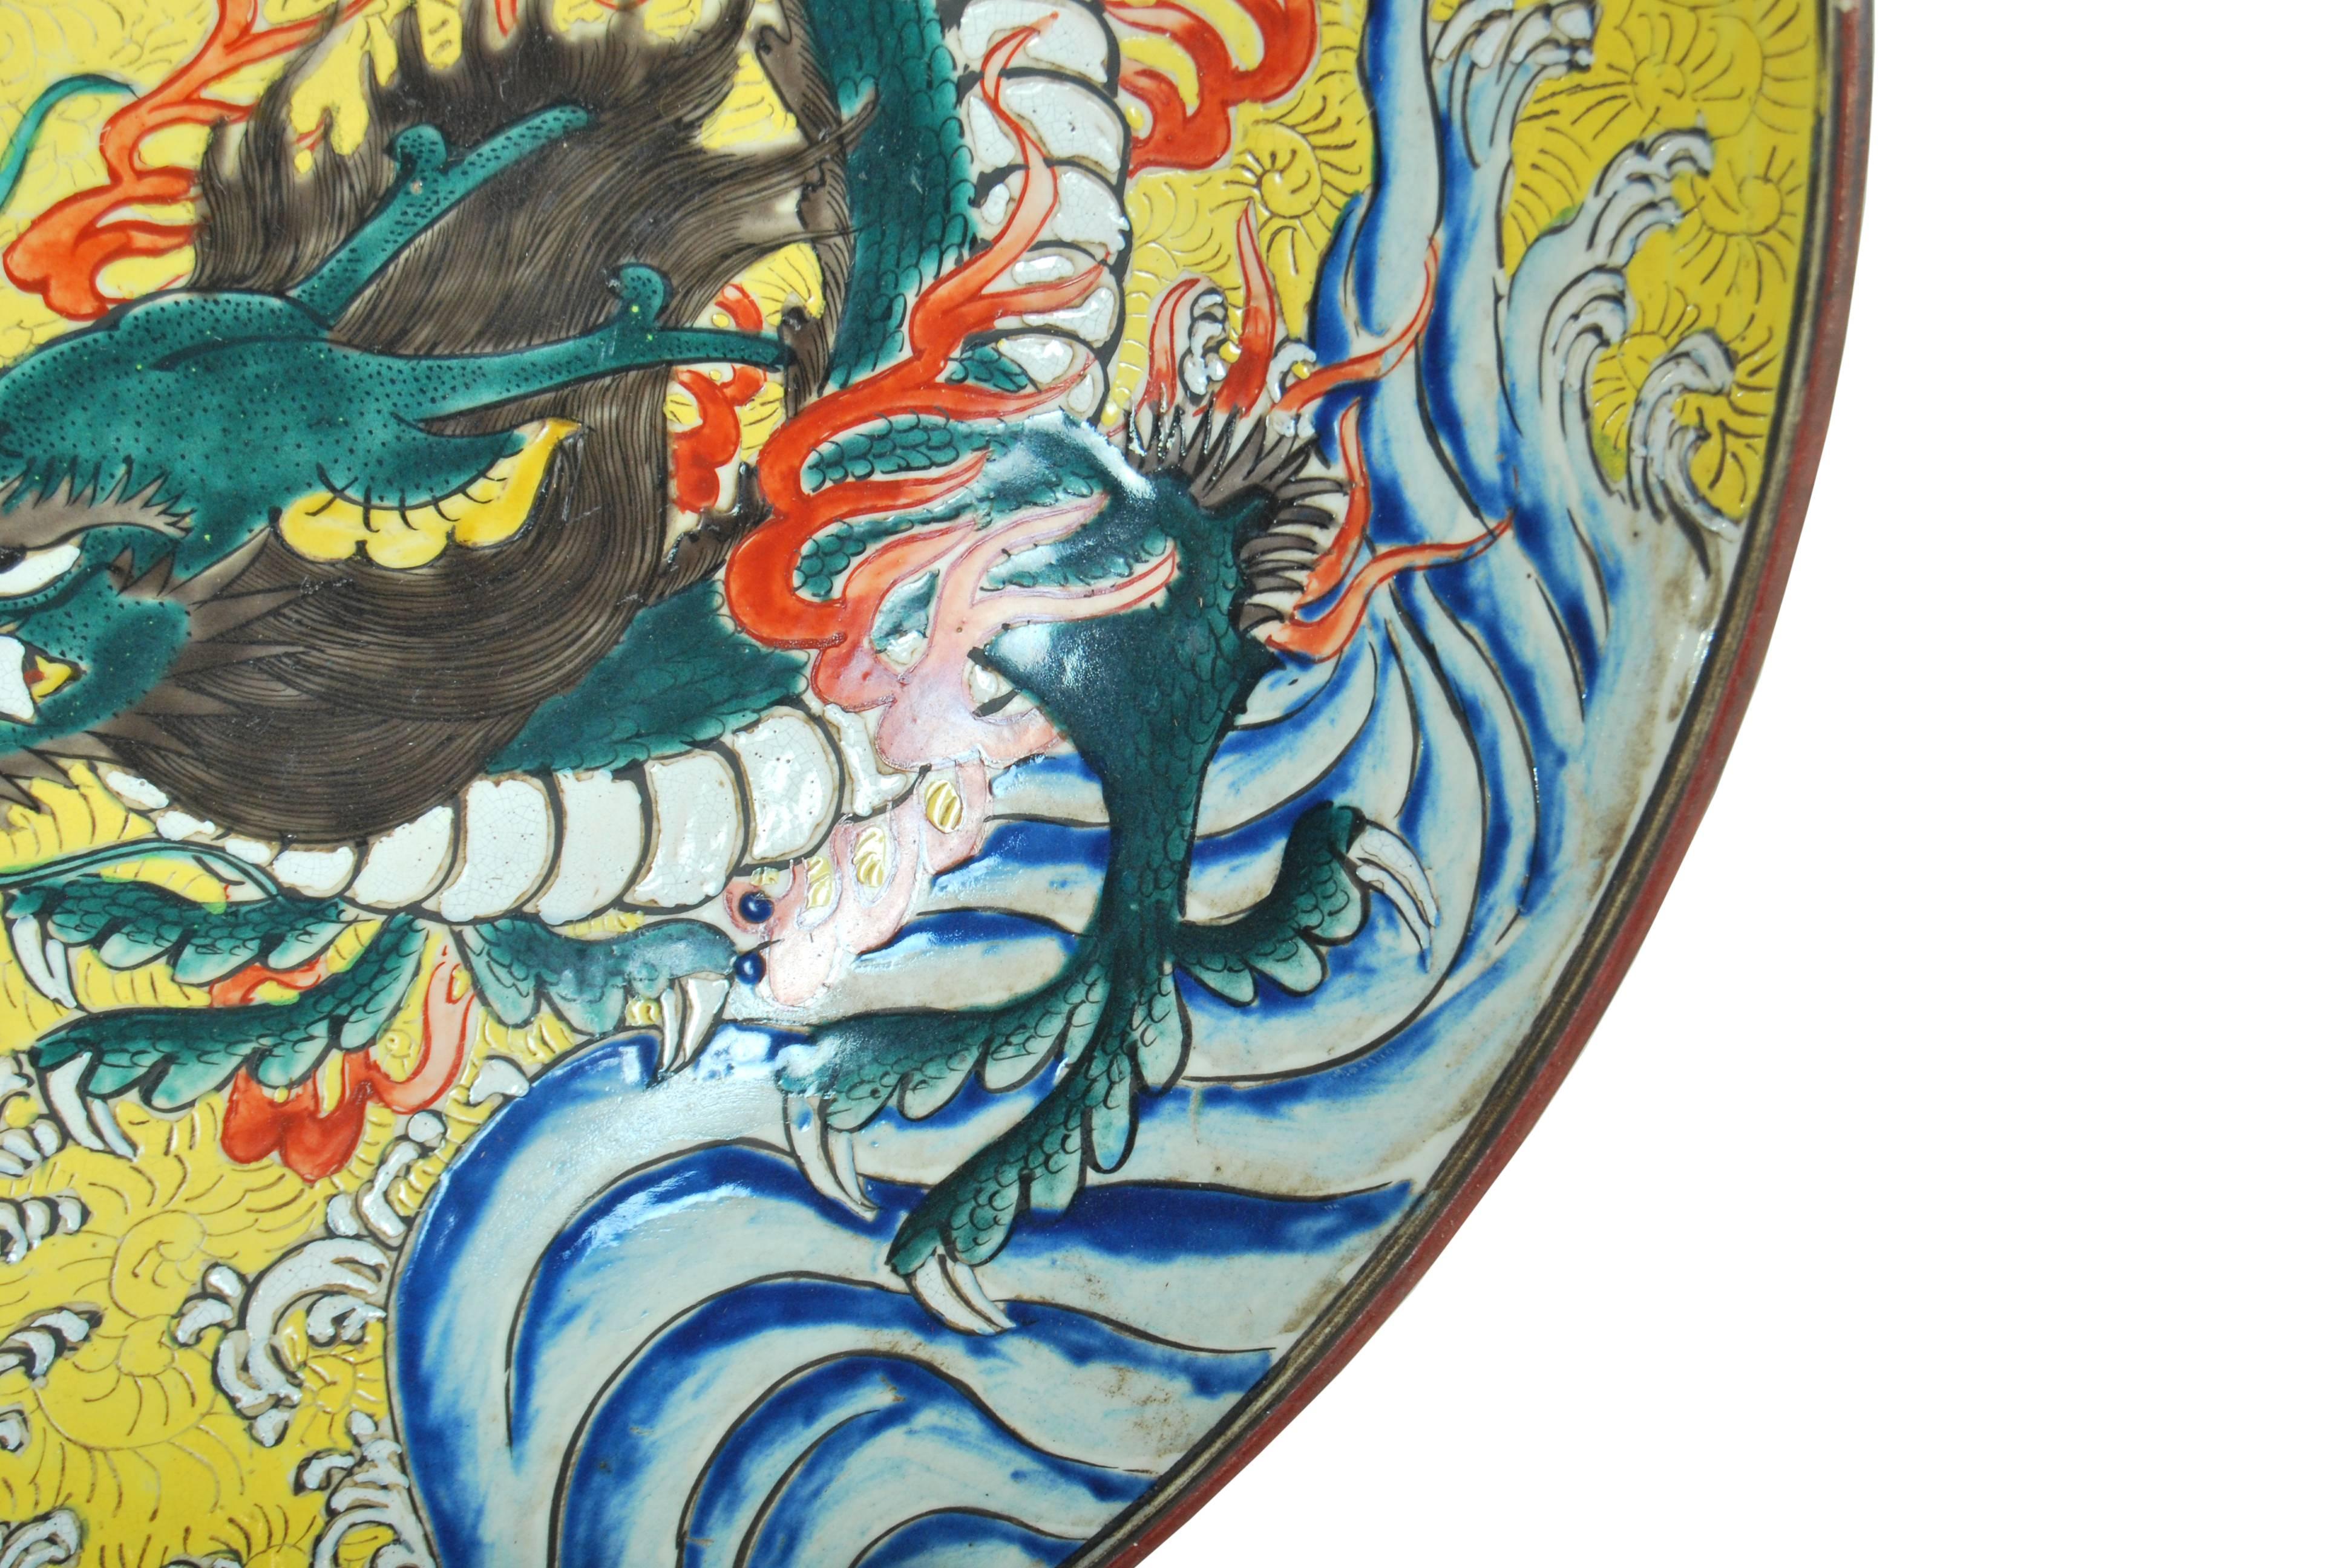 Large antique Japanese kutani porcelain charger decorated with a well painted design of a writhing dragon surrounded by flames and set against a vibrant yellow glazed ground of karakusa scrollwork above a sea of churning waves, the whole executed in